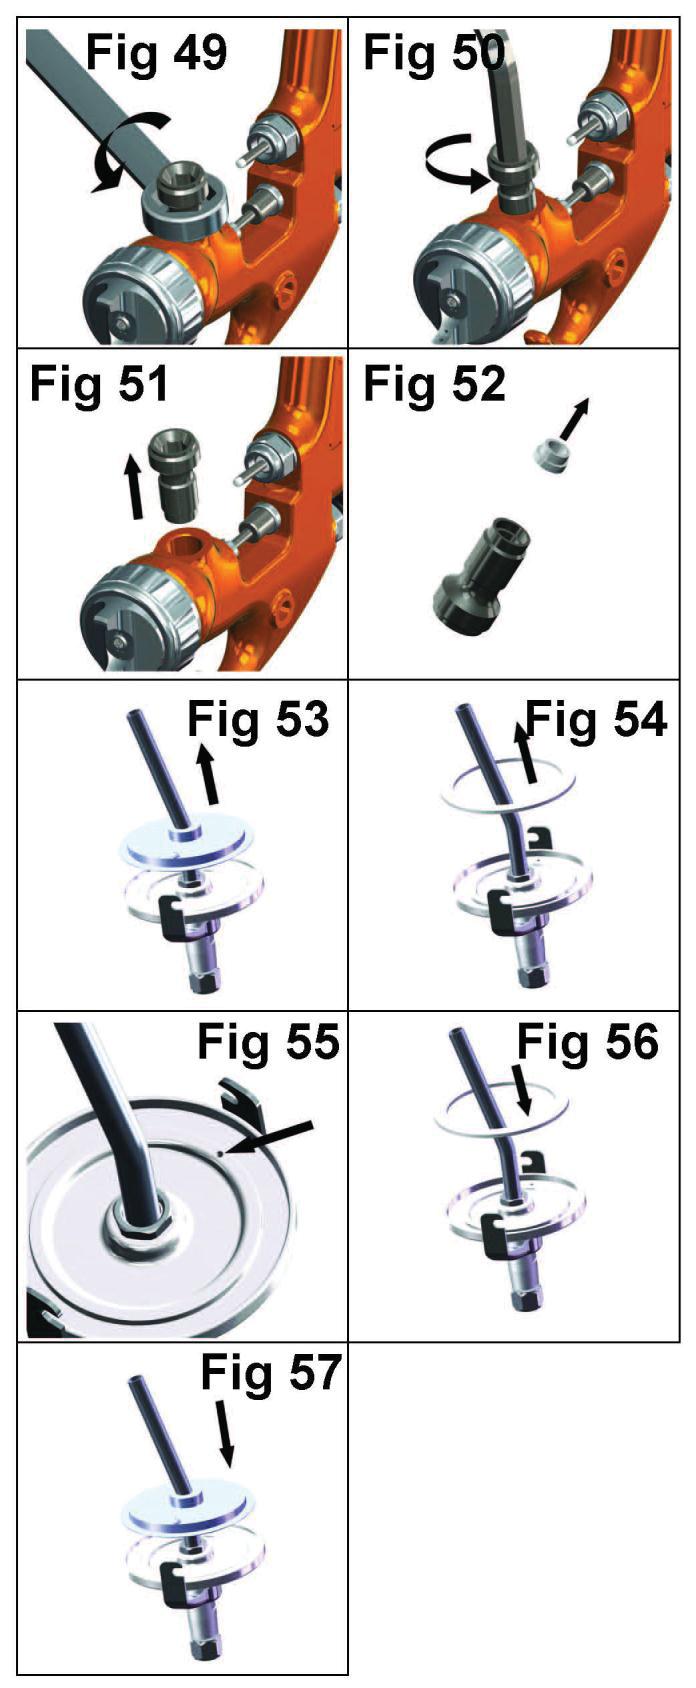 Parts Replacement/ Maintenance FLUID INLET SEAL 1. Loosen Locknut (55) with 18mm Spanner (see Fig 49). 2. Unscrew Fluid Inlet Adaptor (54) with 8mm Hex Key (see fig 50) 3.